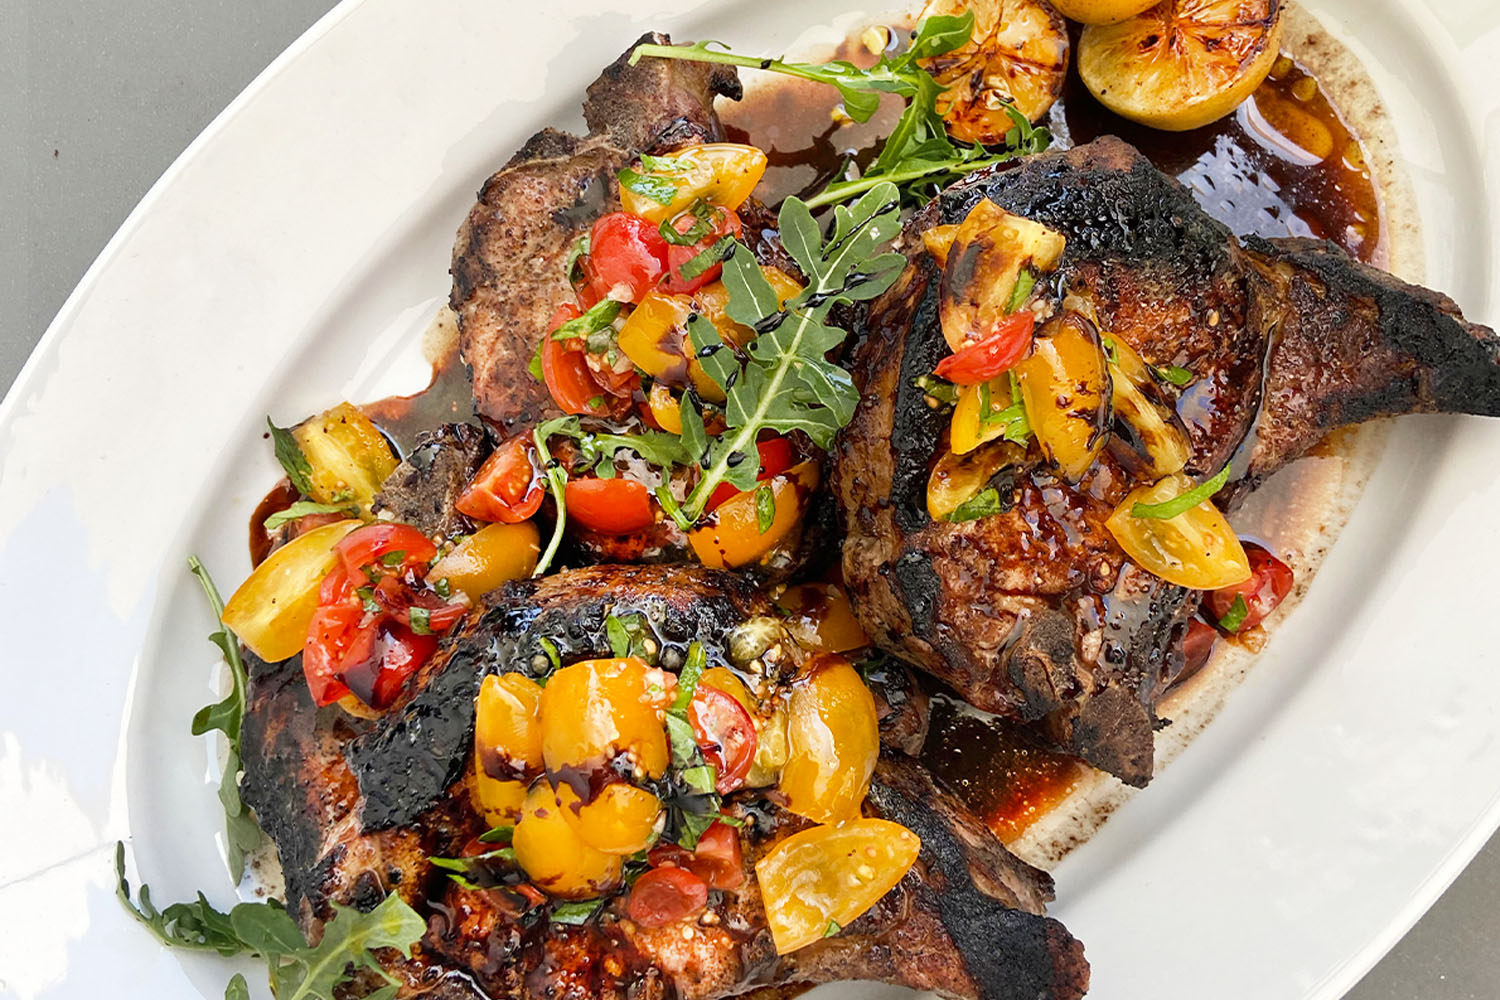 Bobby's grilled pork chops with cherry tomato relish and balasmico.